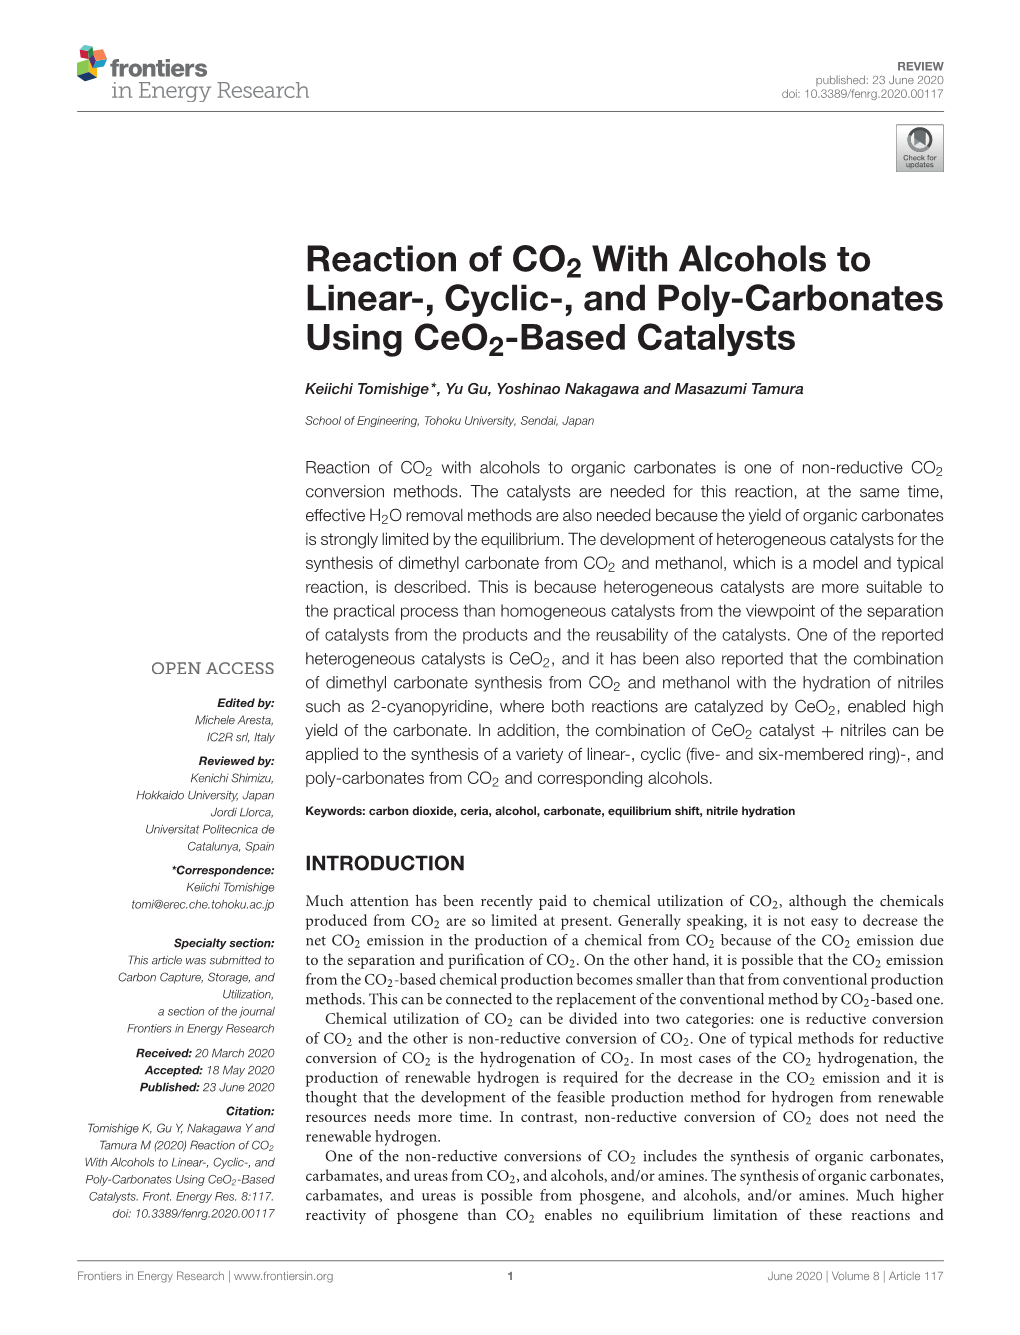 Reaction of CO2 with Alcohols to Linear-, Cyclic-, and Poly-Carbonates Using Ceo2-Based Catalysts